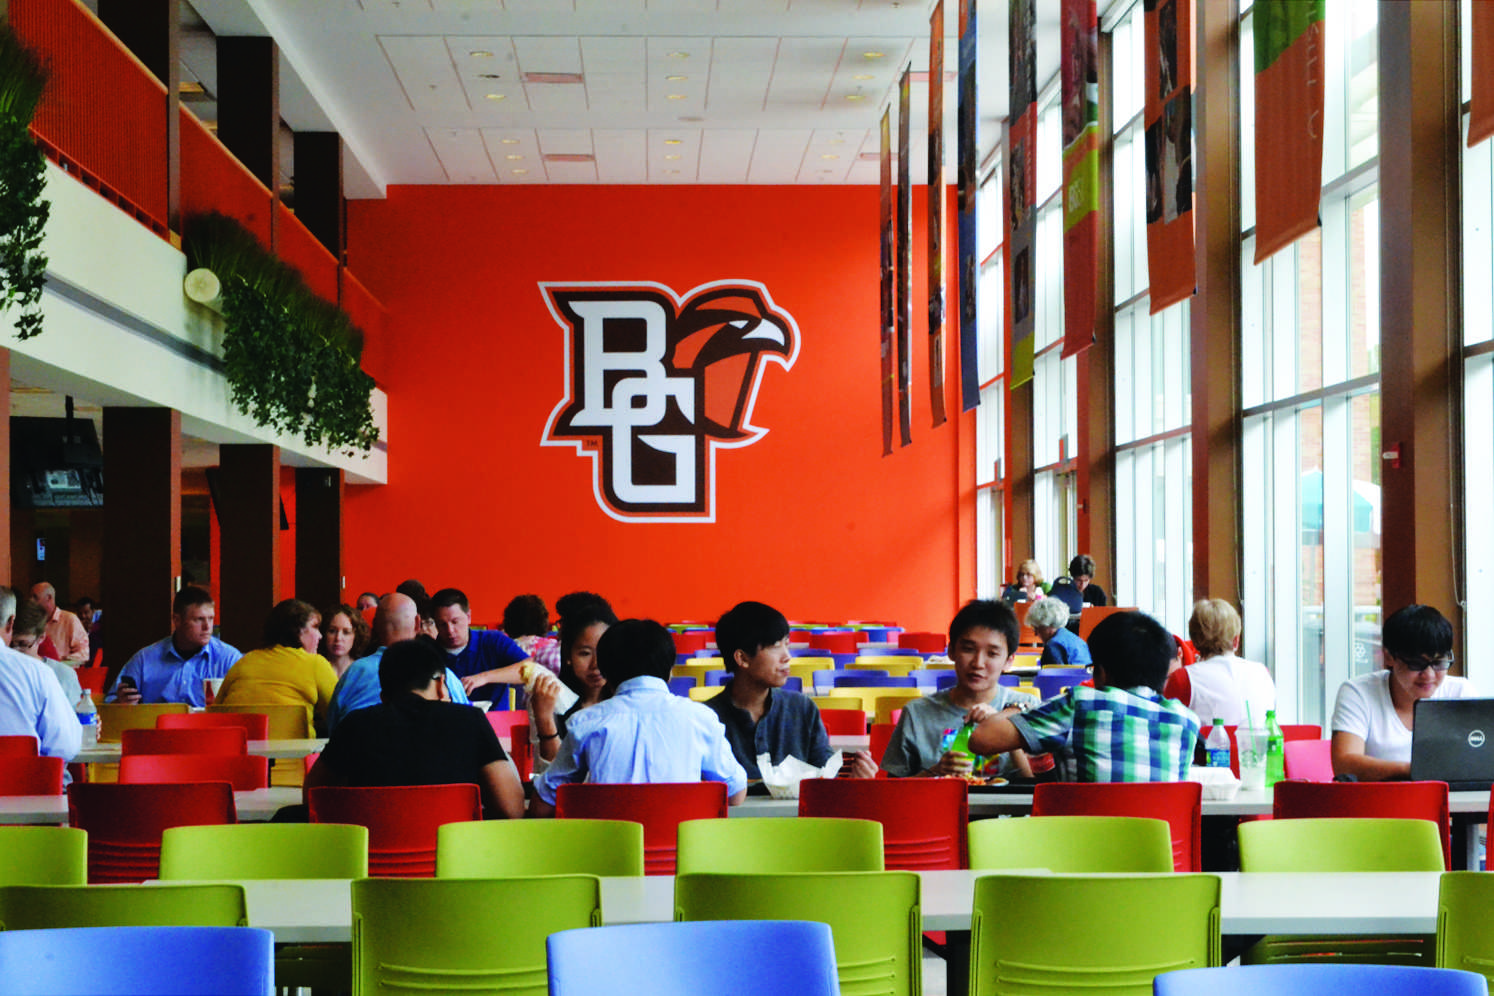 The Union renovations add University pride to its design in addition to new dining options in the revamped Falcon’s Nest.